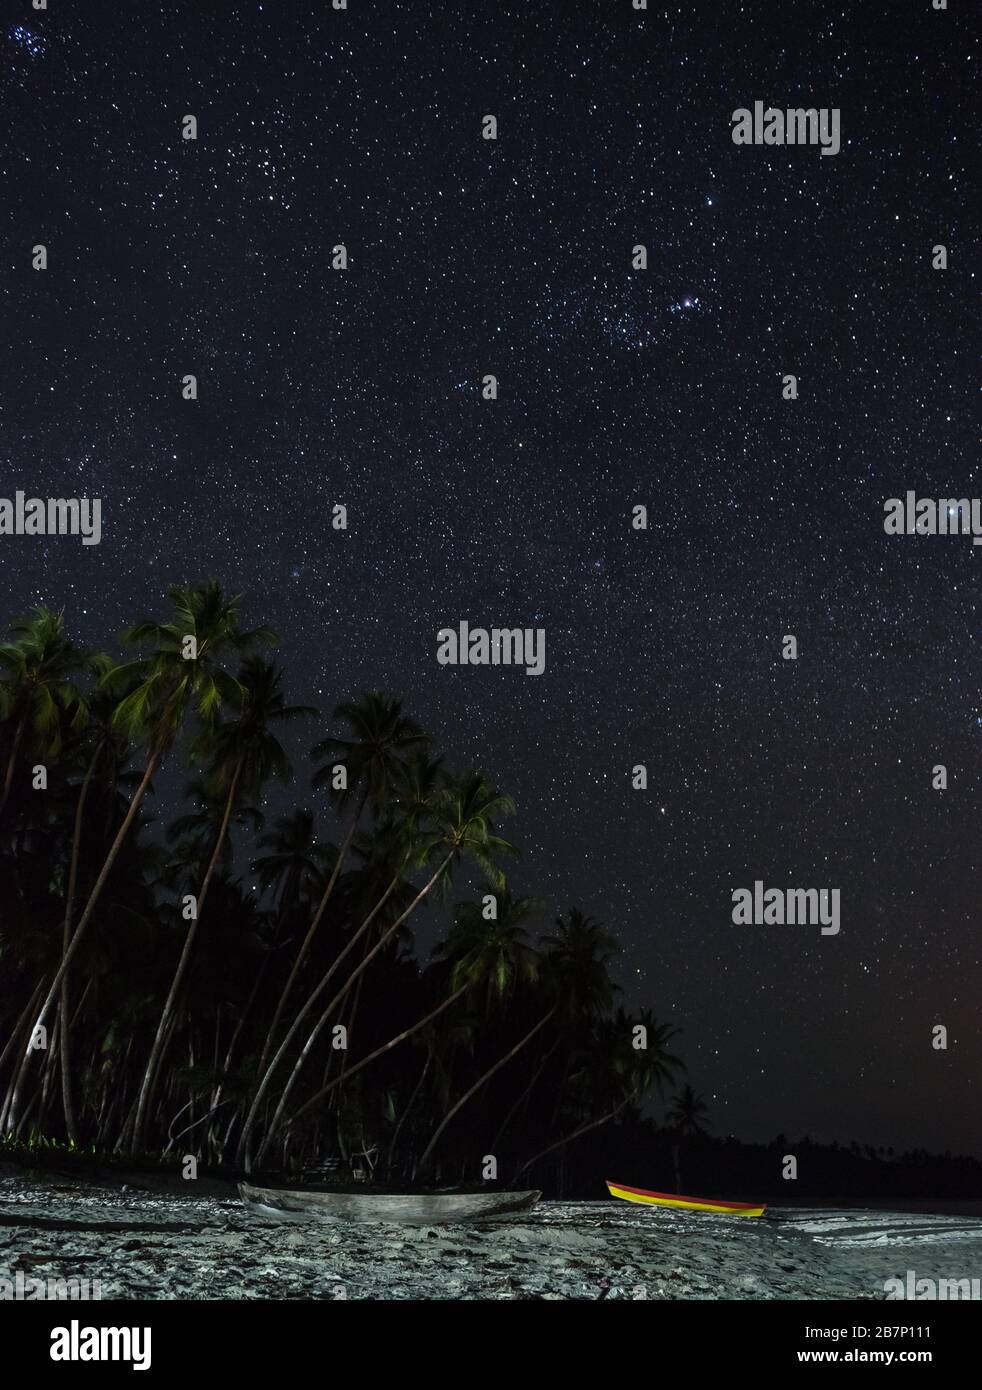 thousands of stars above pristine beach filled with palms in Kei kecil, Maluku, eastern Indonesia Stock Photo